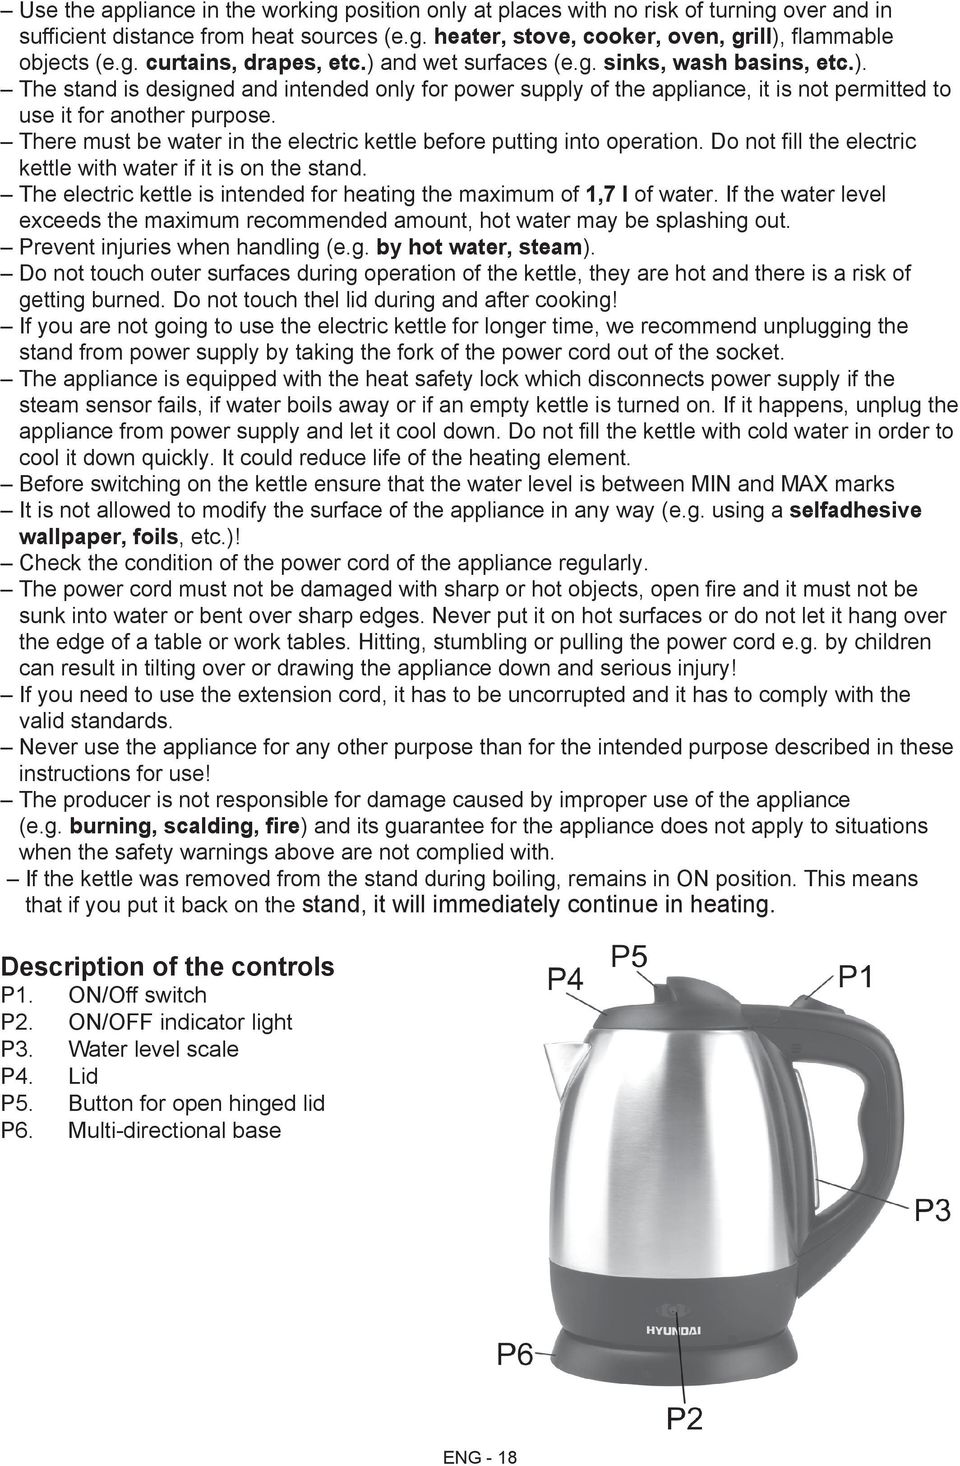 There must be water in the electric kettle before putting into operation. Do not fill the electric kettle with water if it is on the stand.